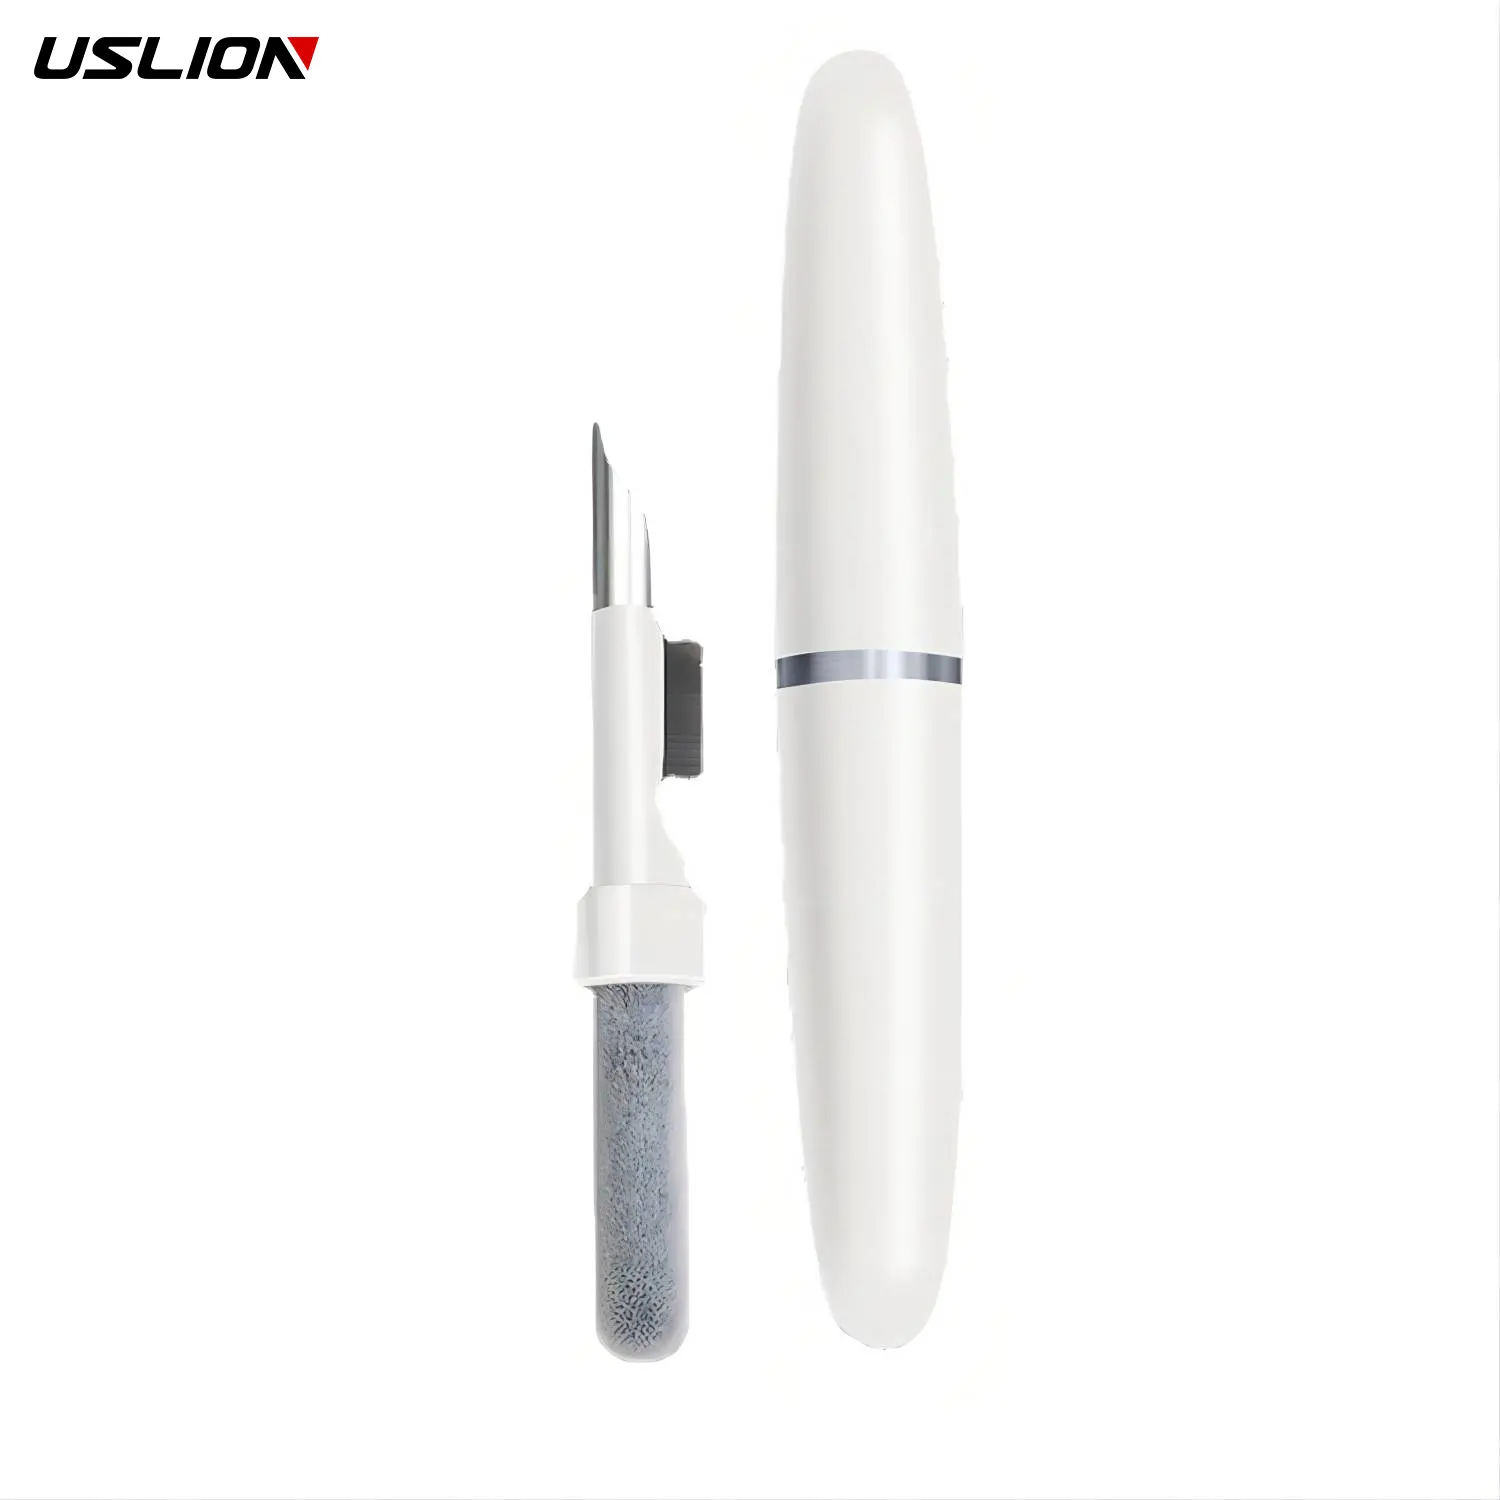 USLION Multi-functional Headphone Earbuds Earphones Cleaning Pen Brush 2022 New Portable Case Cleaning Tools Cleaner Kit